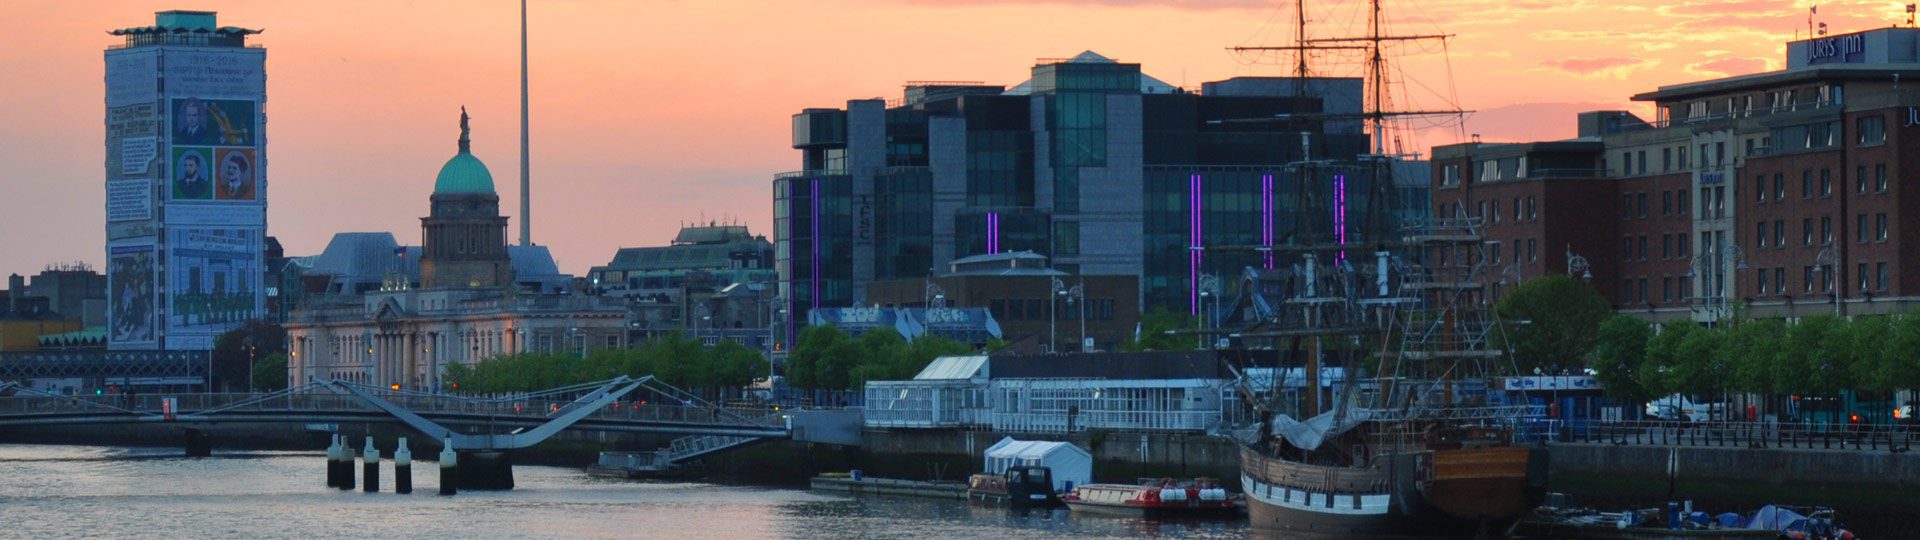 Sunset over Dublin City showing the river Liffey, the Jeanie Johnston along the quay, and the IFSC